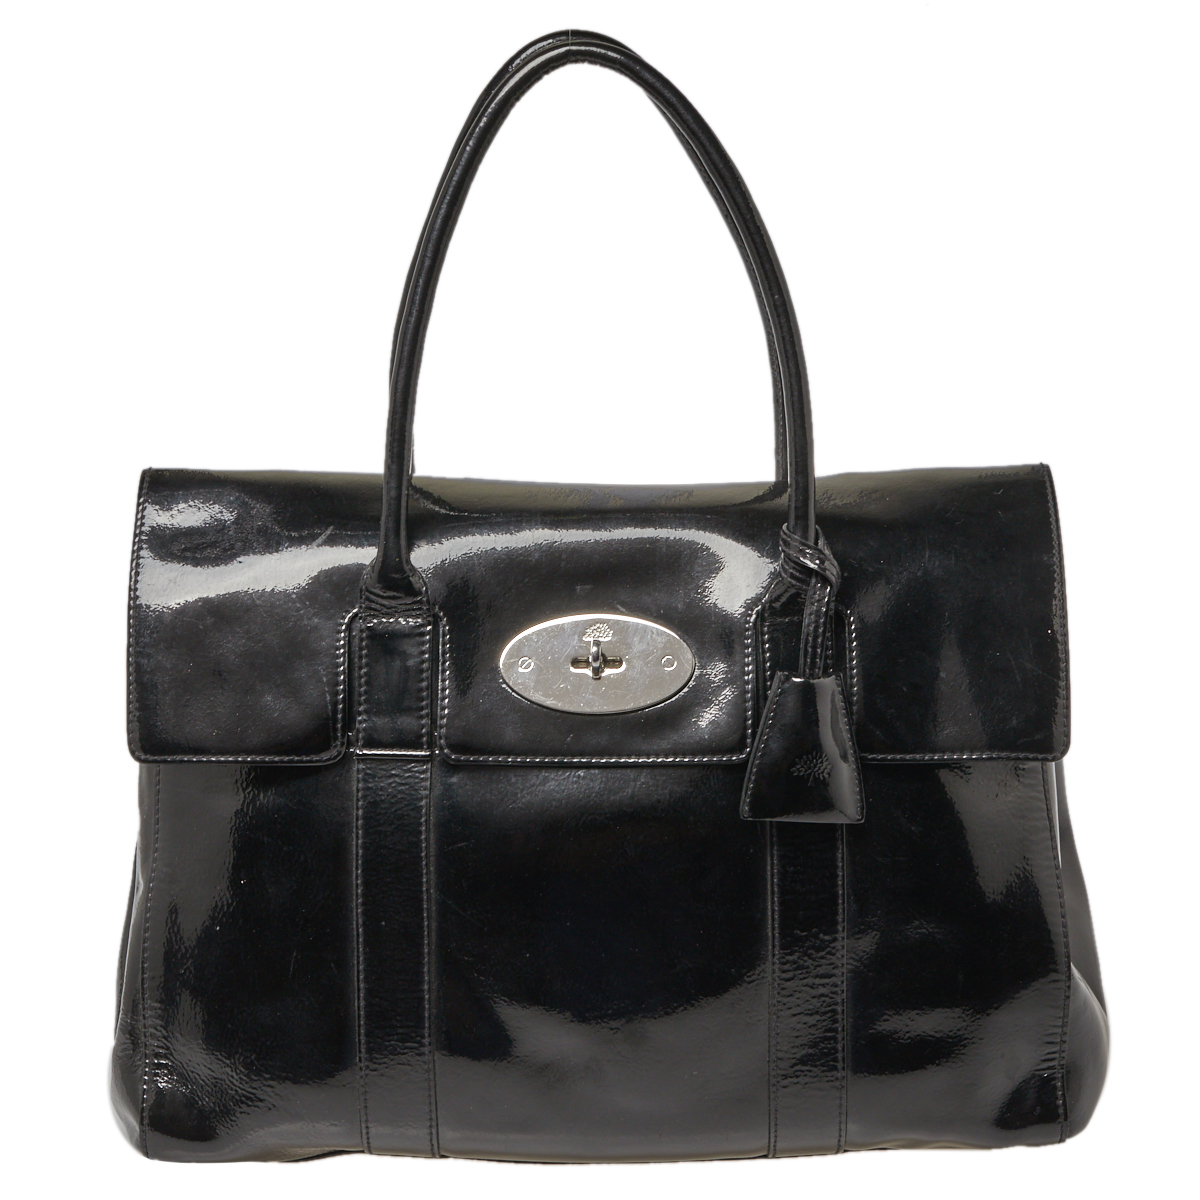 Mulberry Black Patent Leather Bayswater Satchel